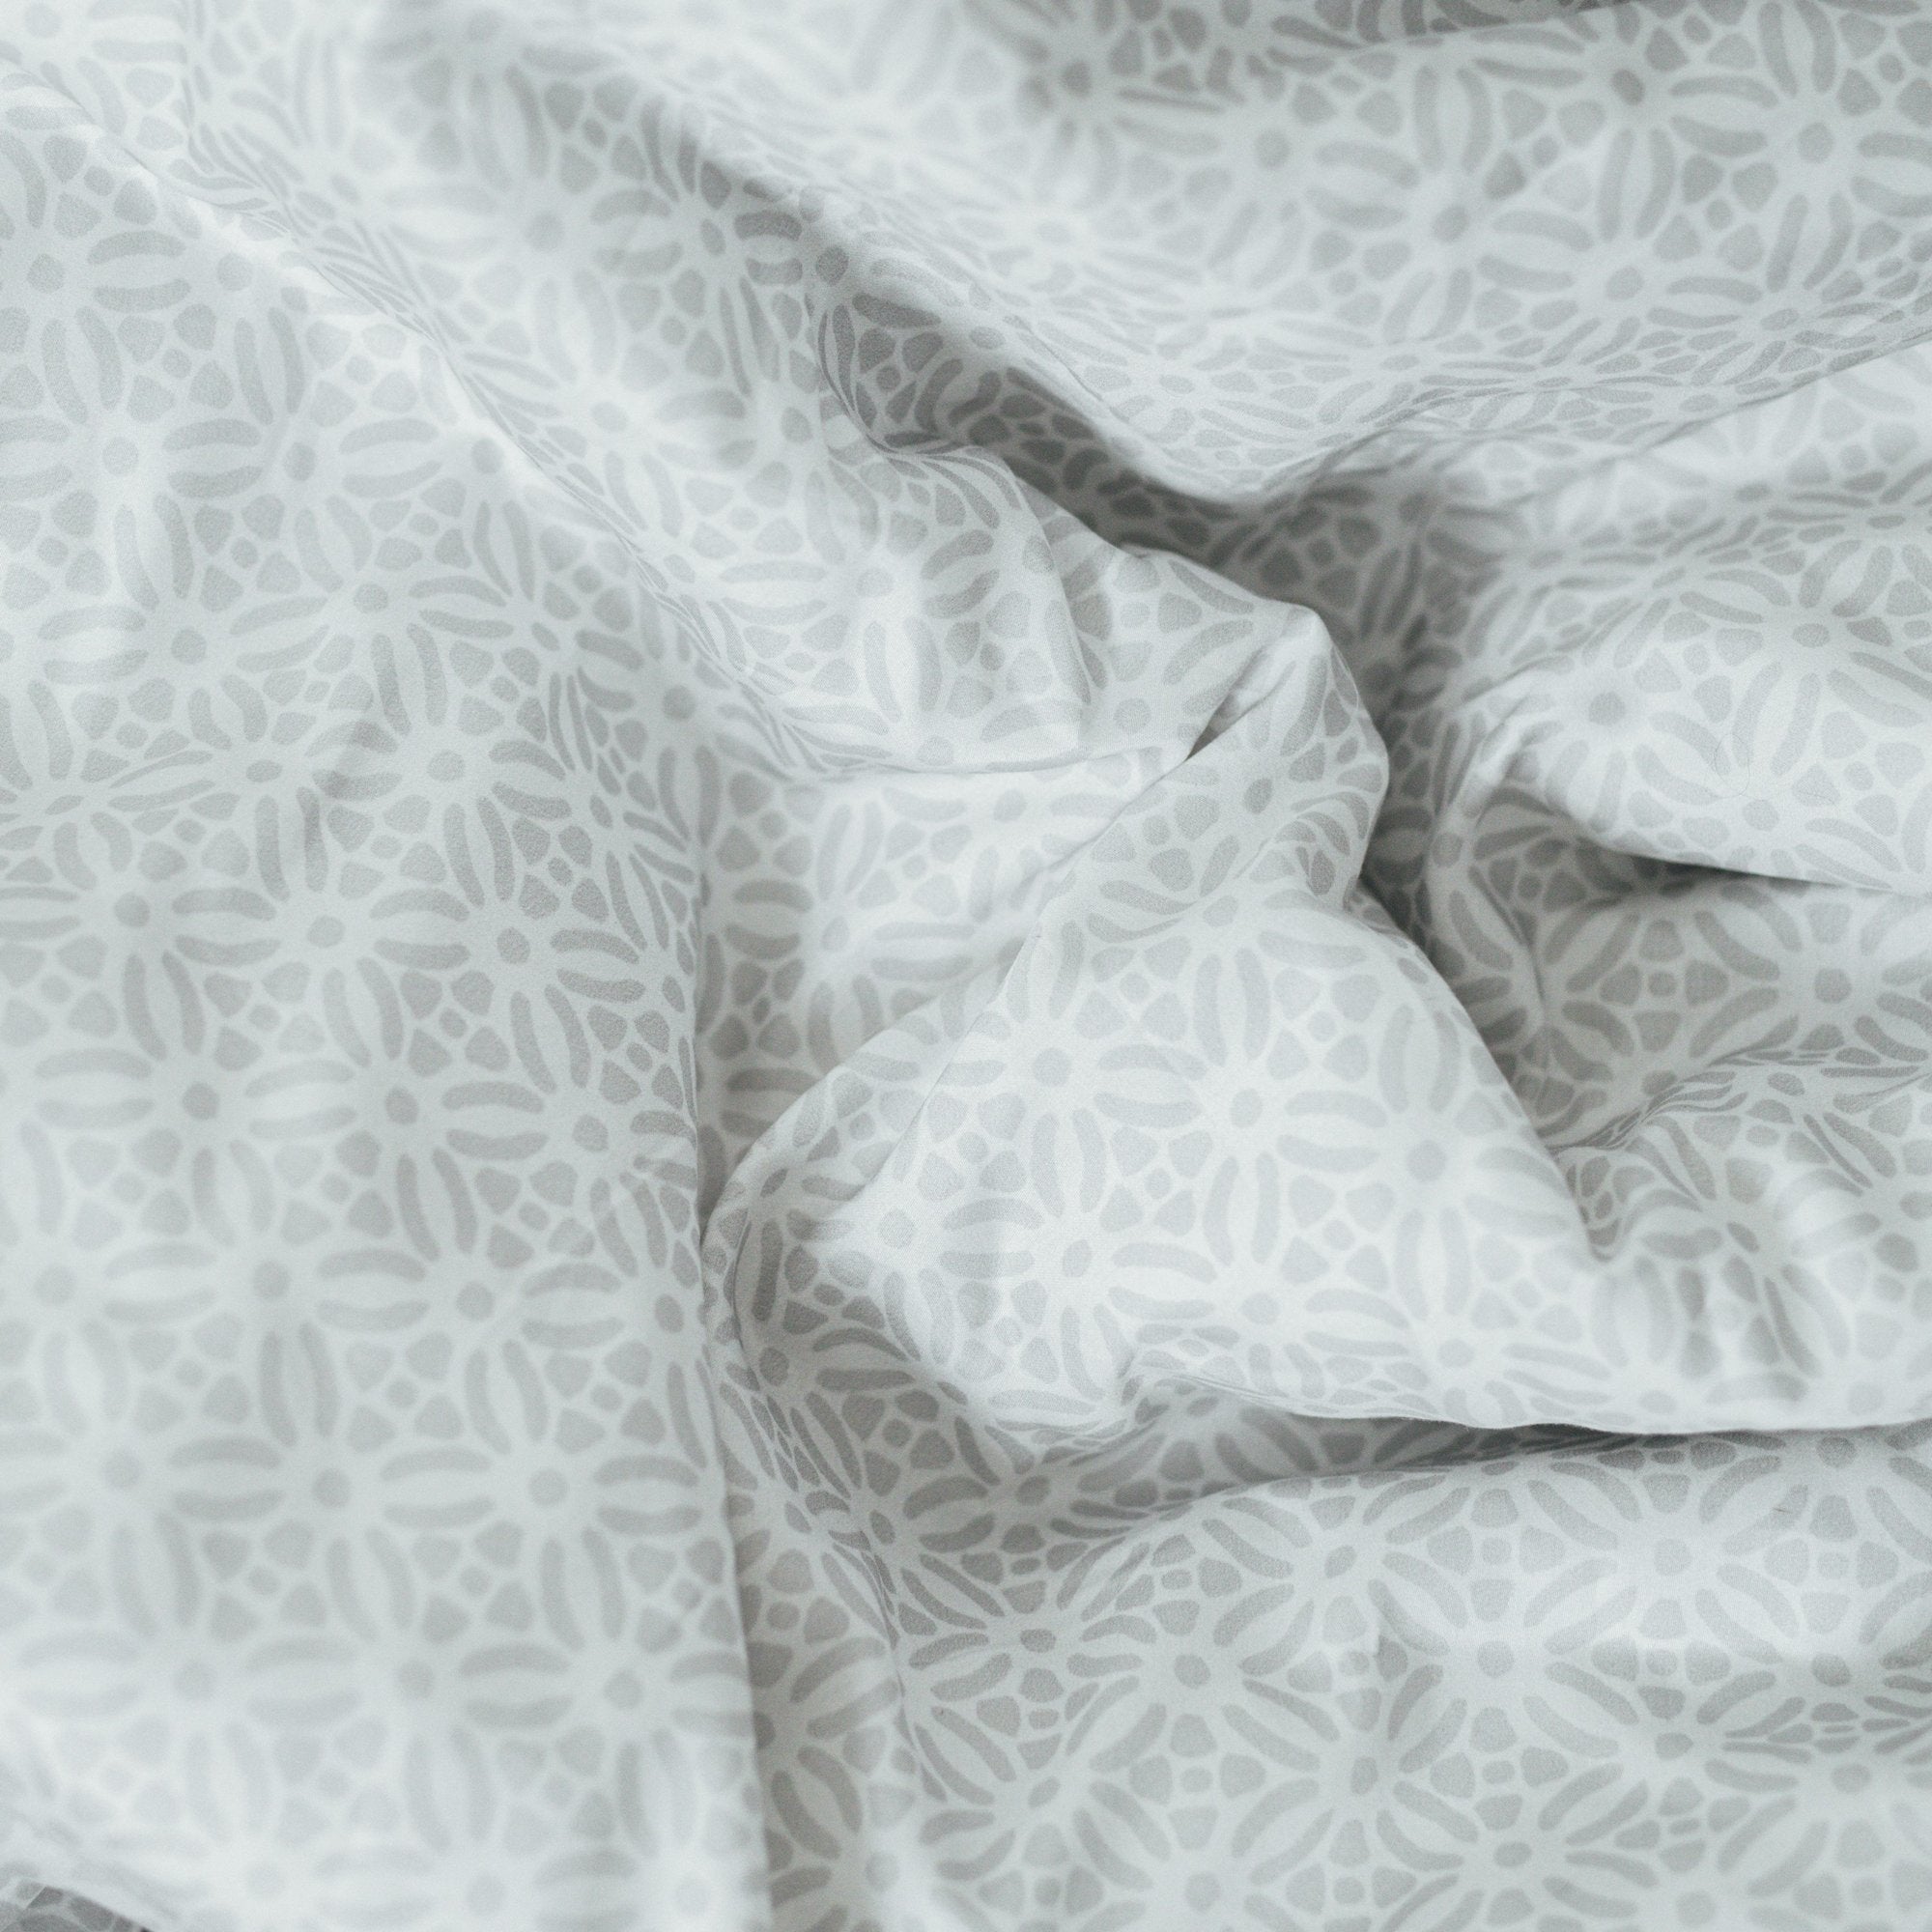 Organic vs Synthetic; Which Bedding Is Right For You